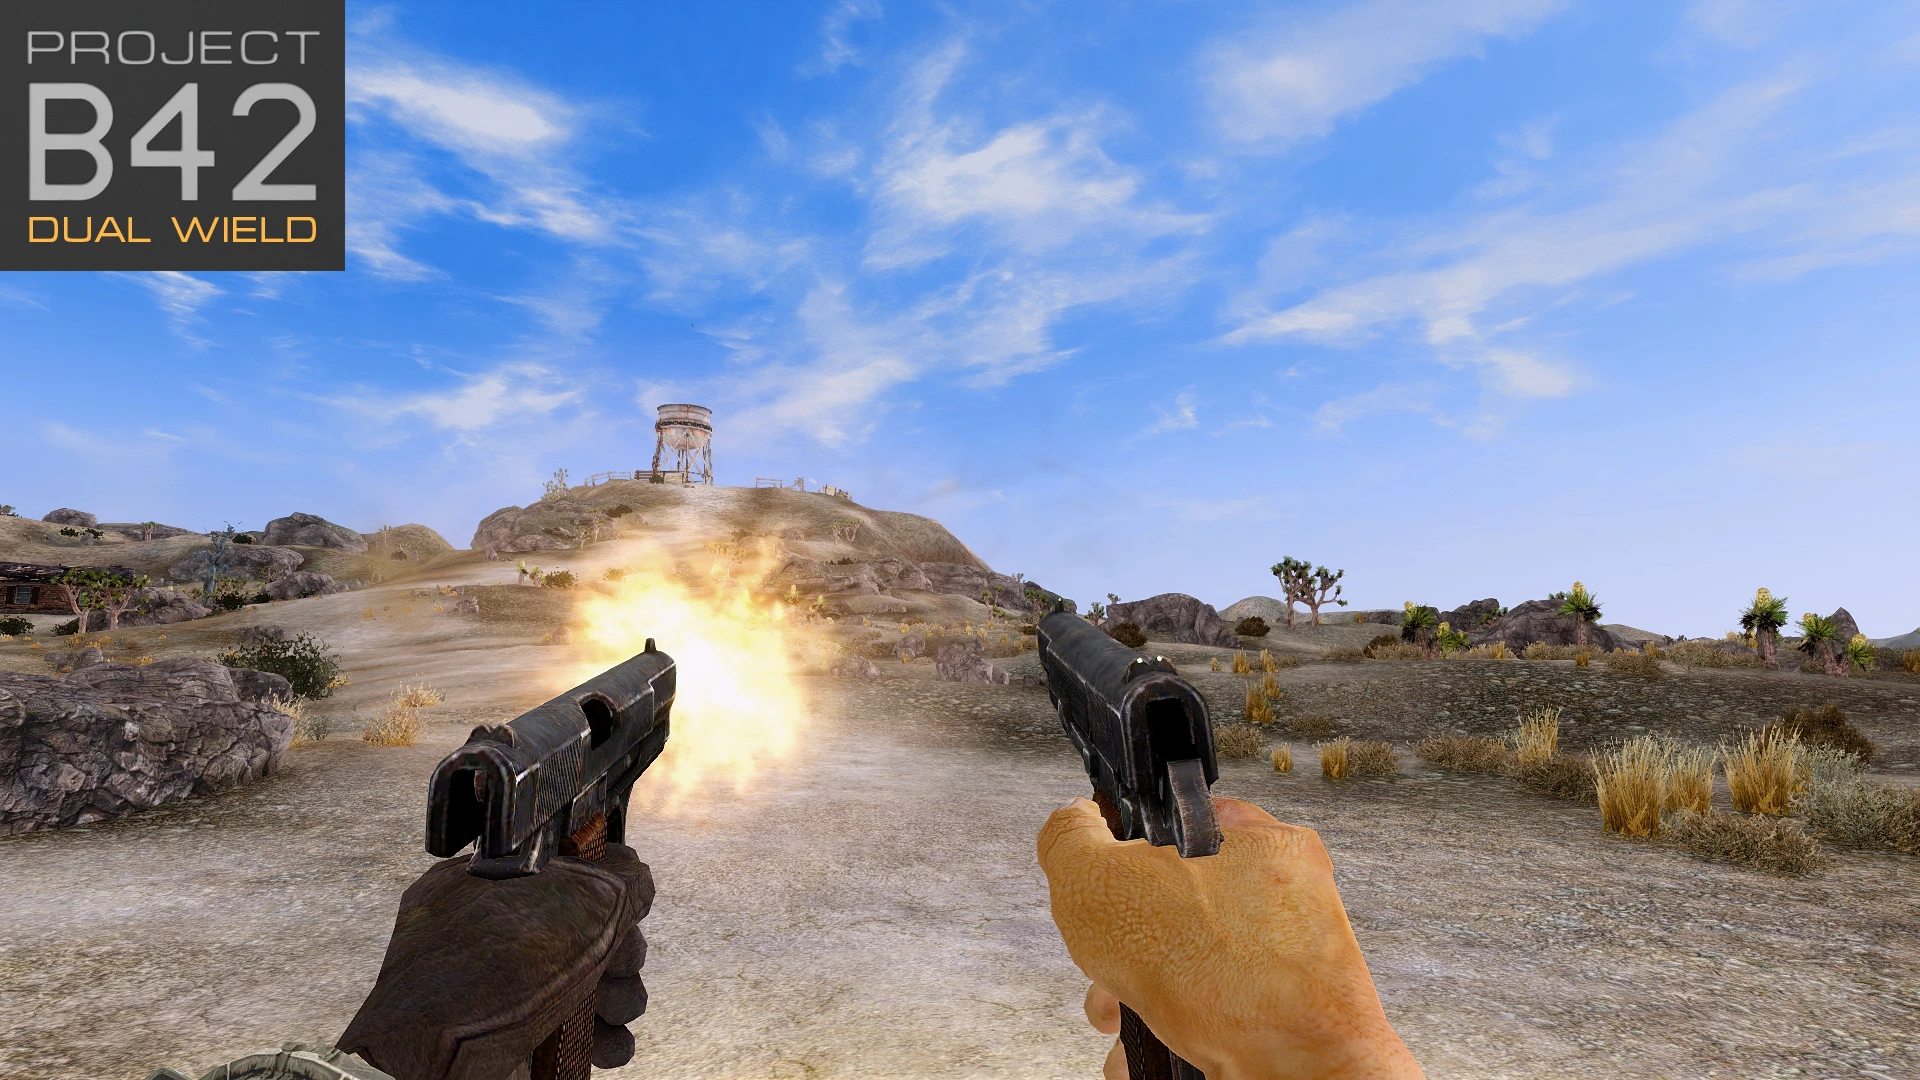 fallout new vegas smoother aiming